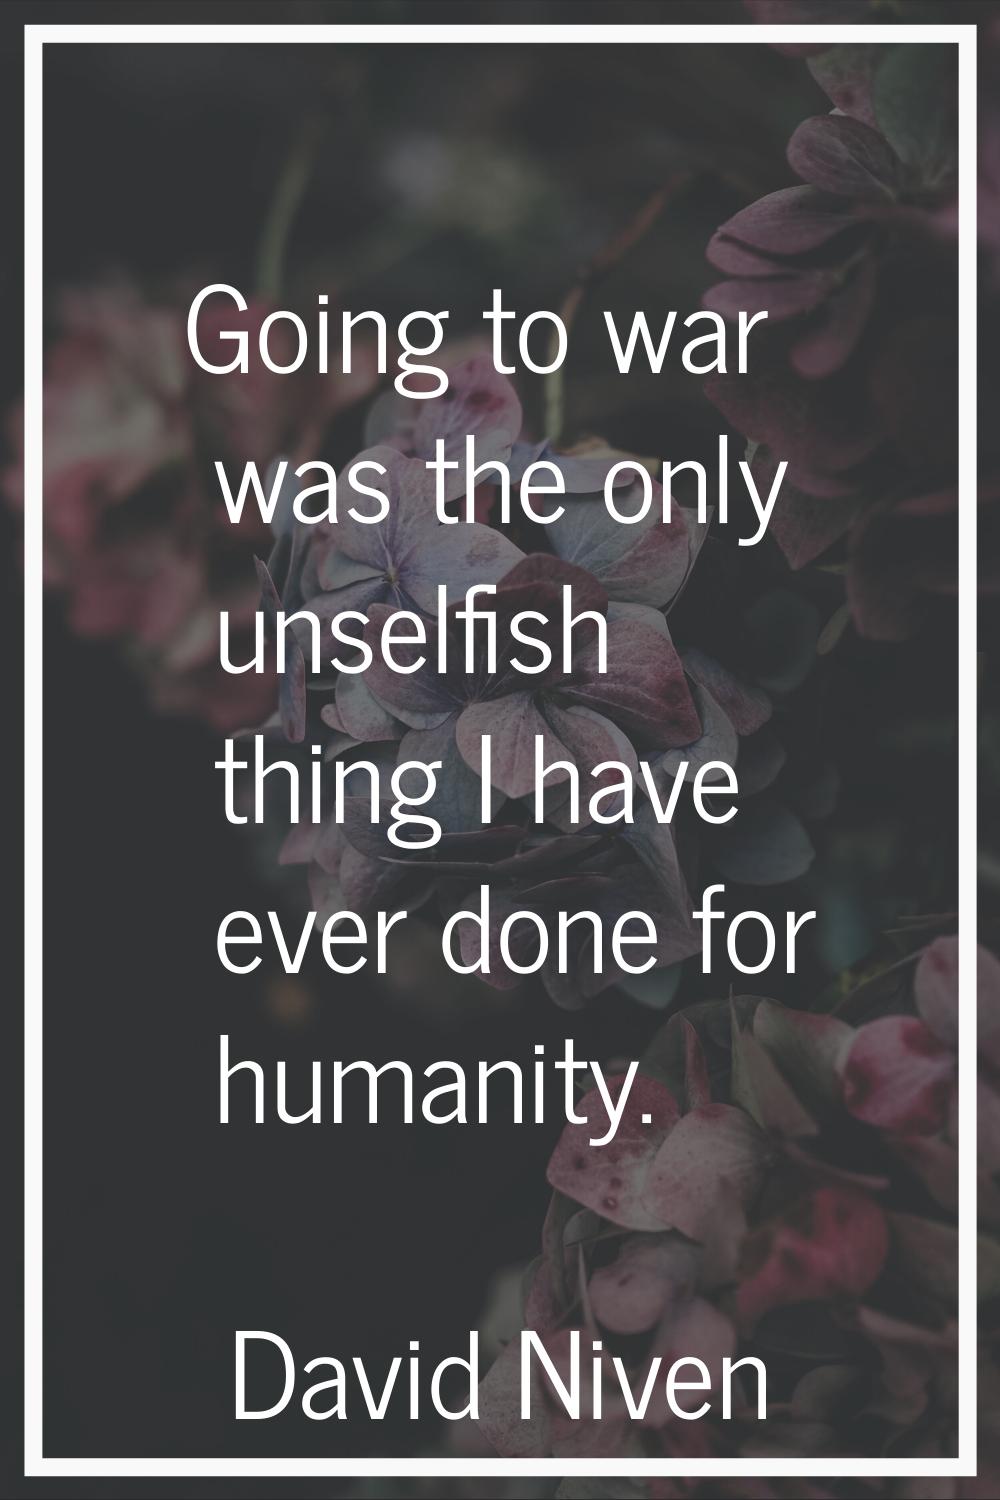 Going to war was the only unselfish thing I have ever done for humanity.